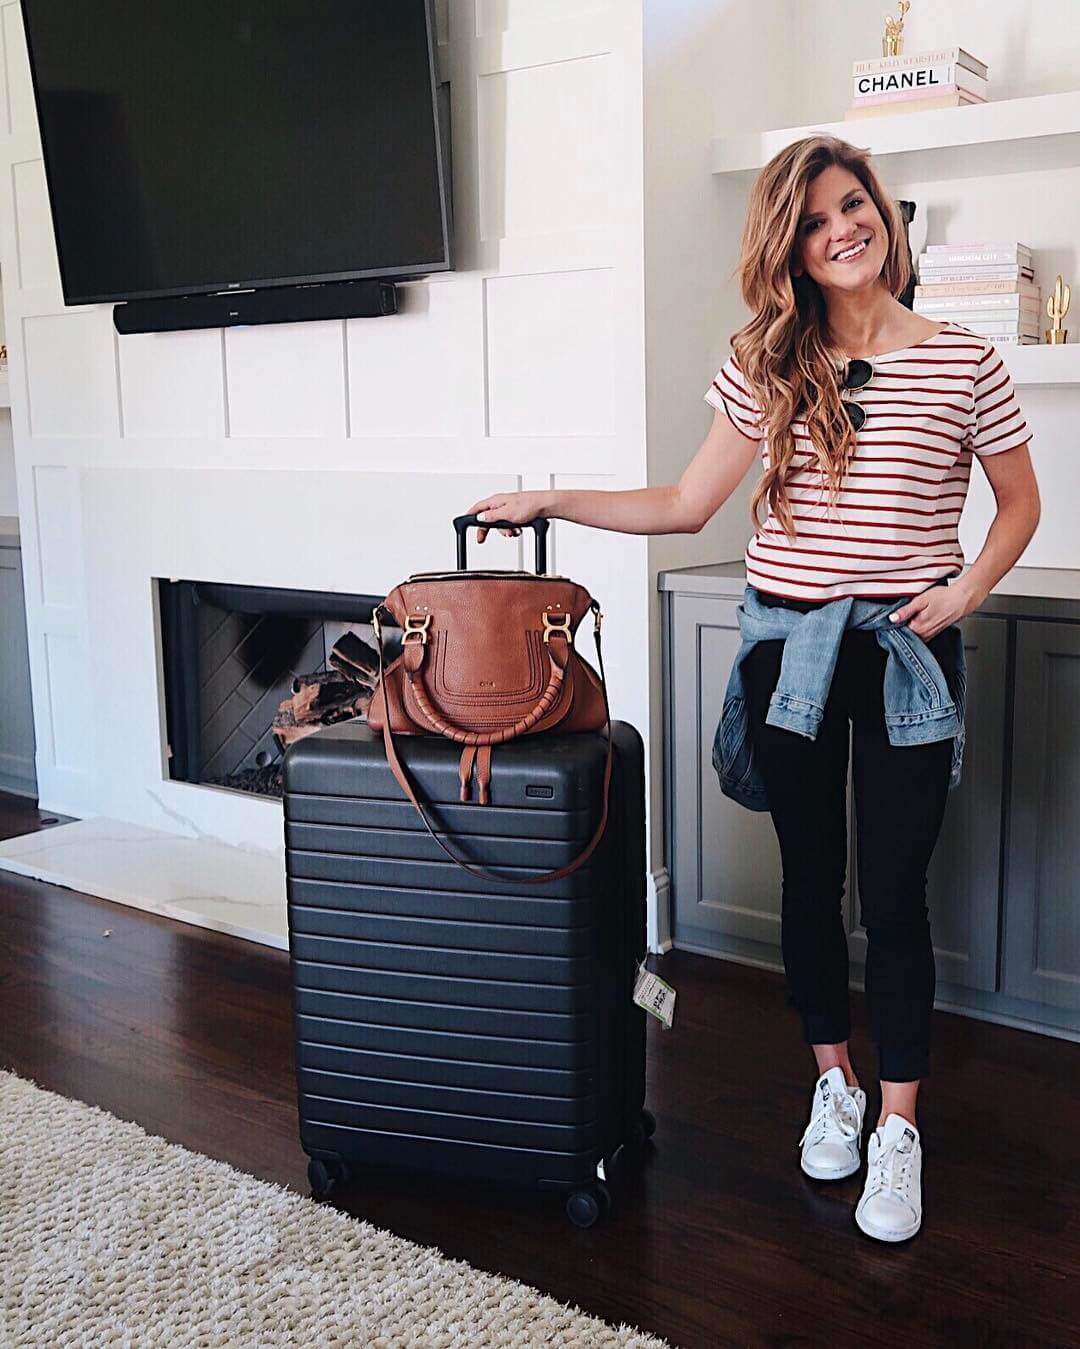 brighton keller travel outfit ideas wearing red and white striped tee with black jeans and denim jacket 